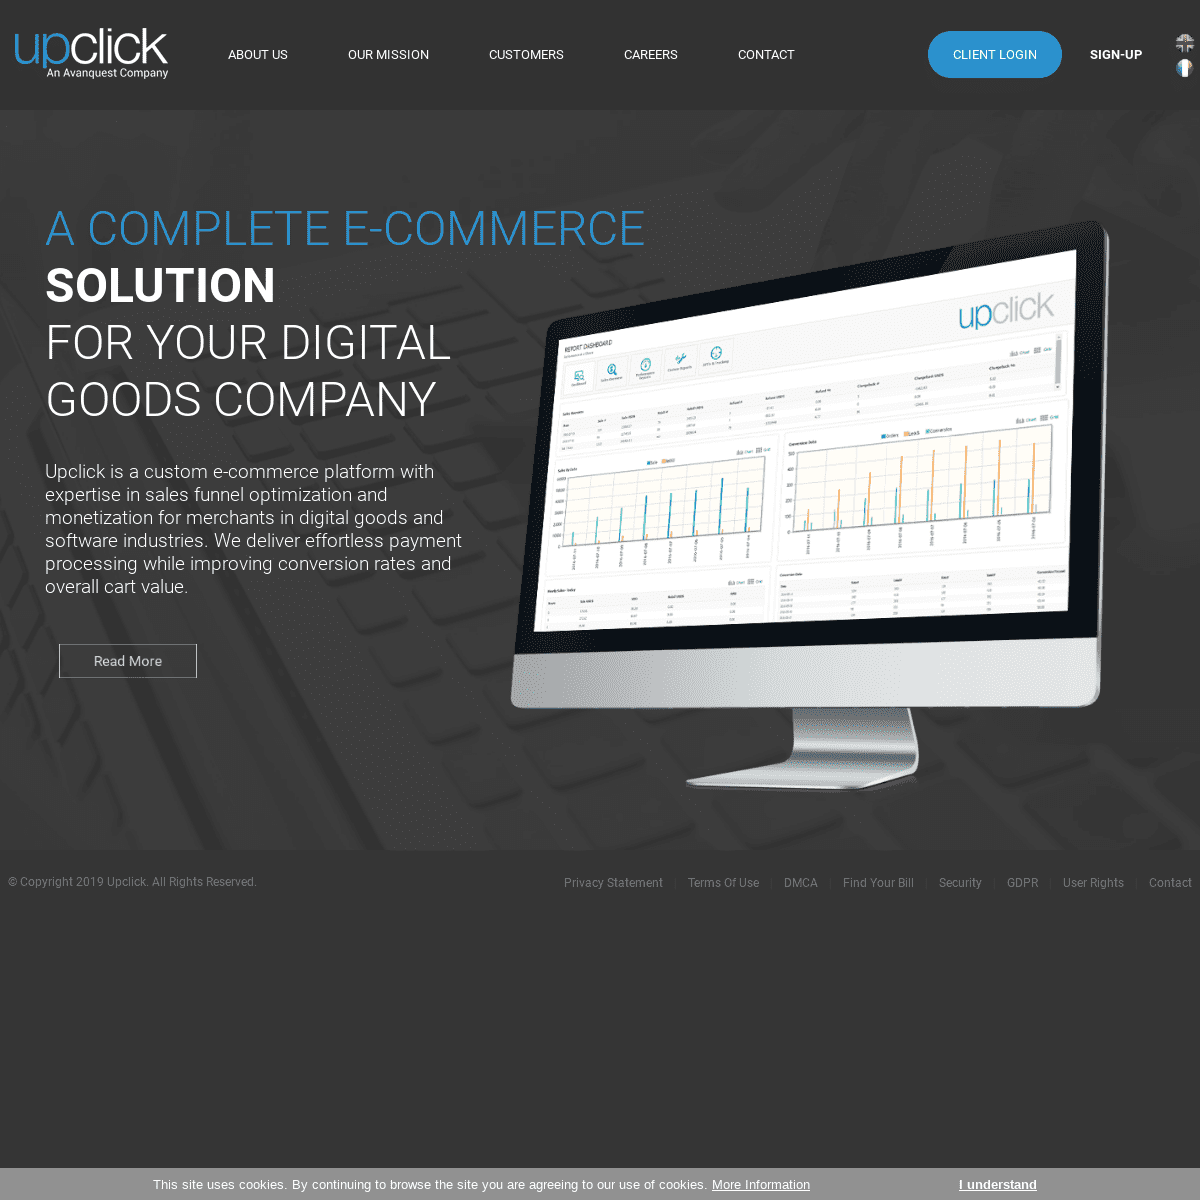 A Complete E-commerce Solution For Digital Goods Companies - Upclick